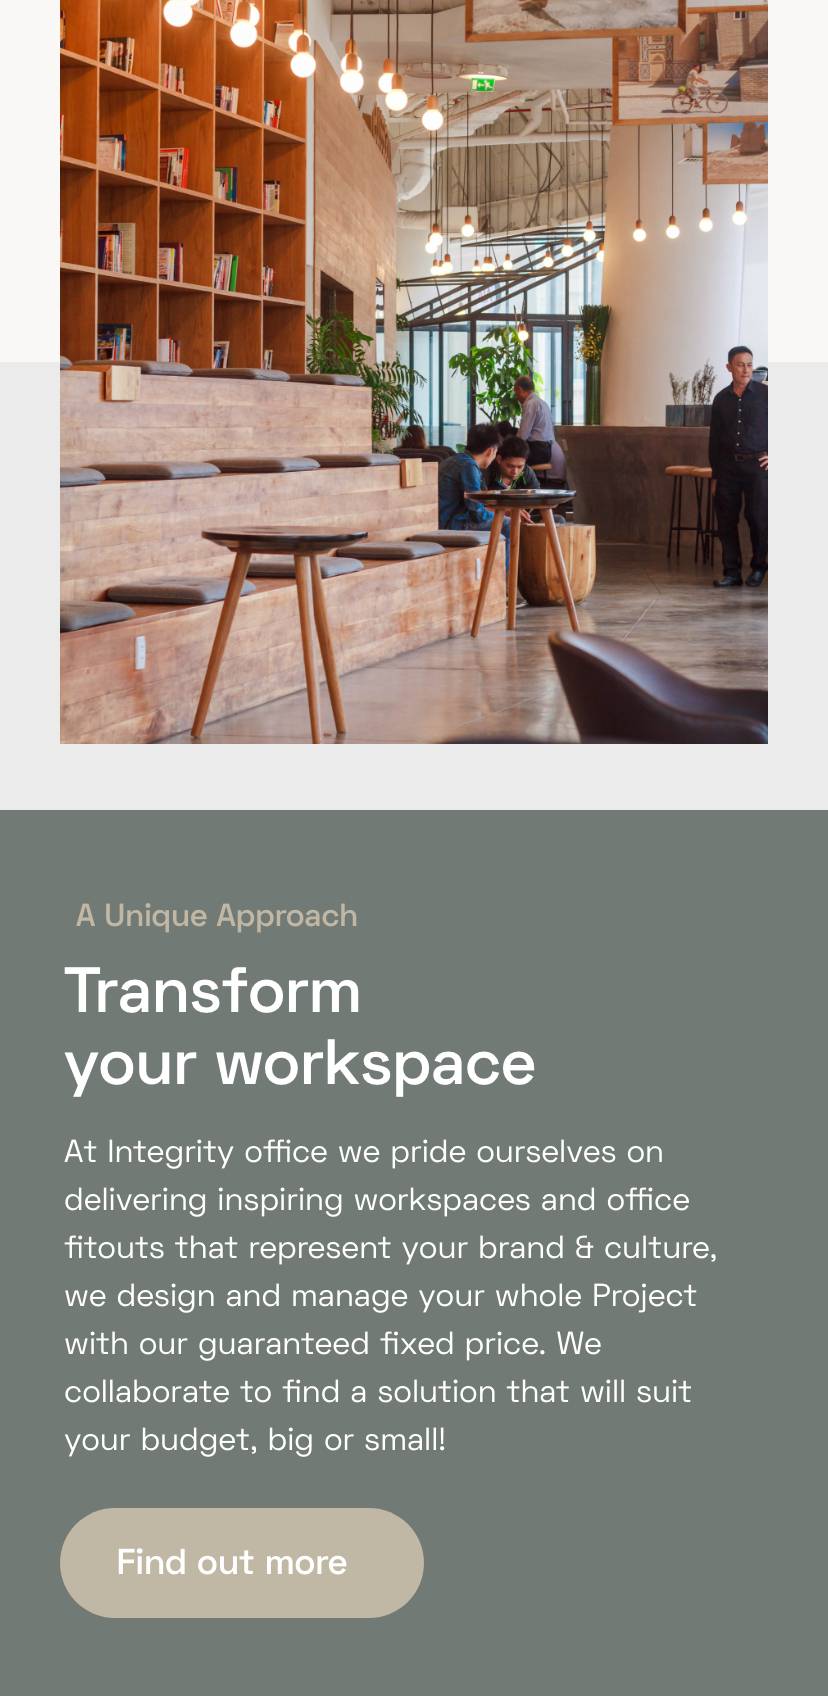 Integrity Office Transform your workspace mobile view